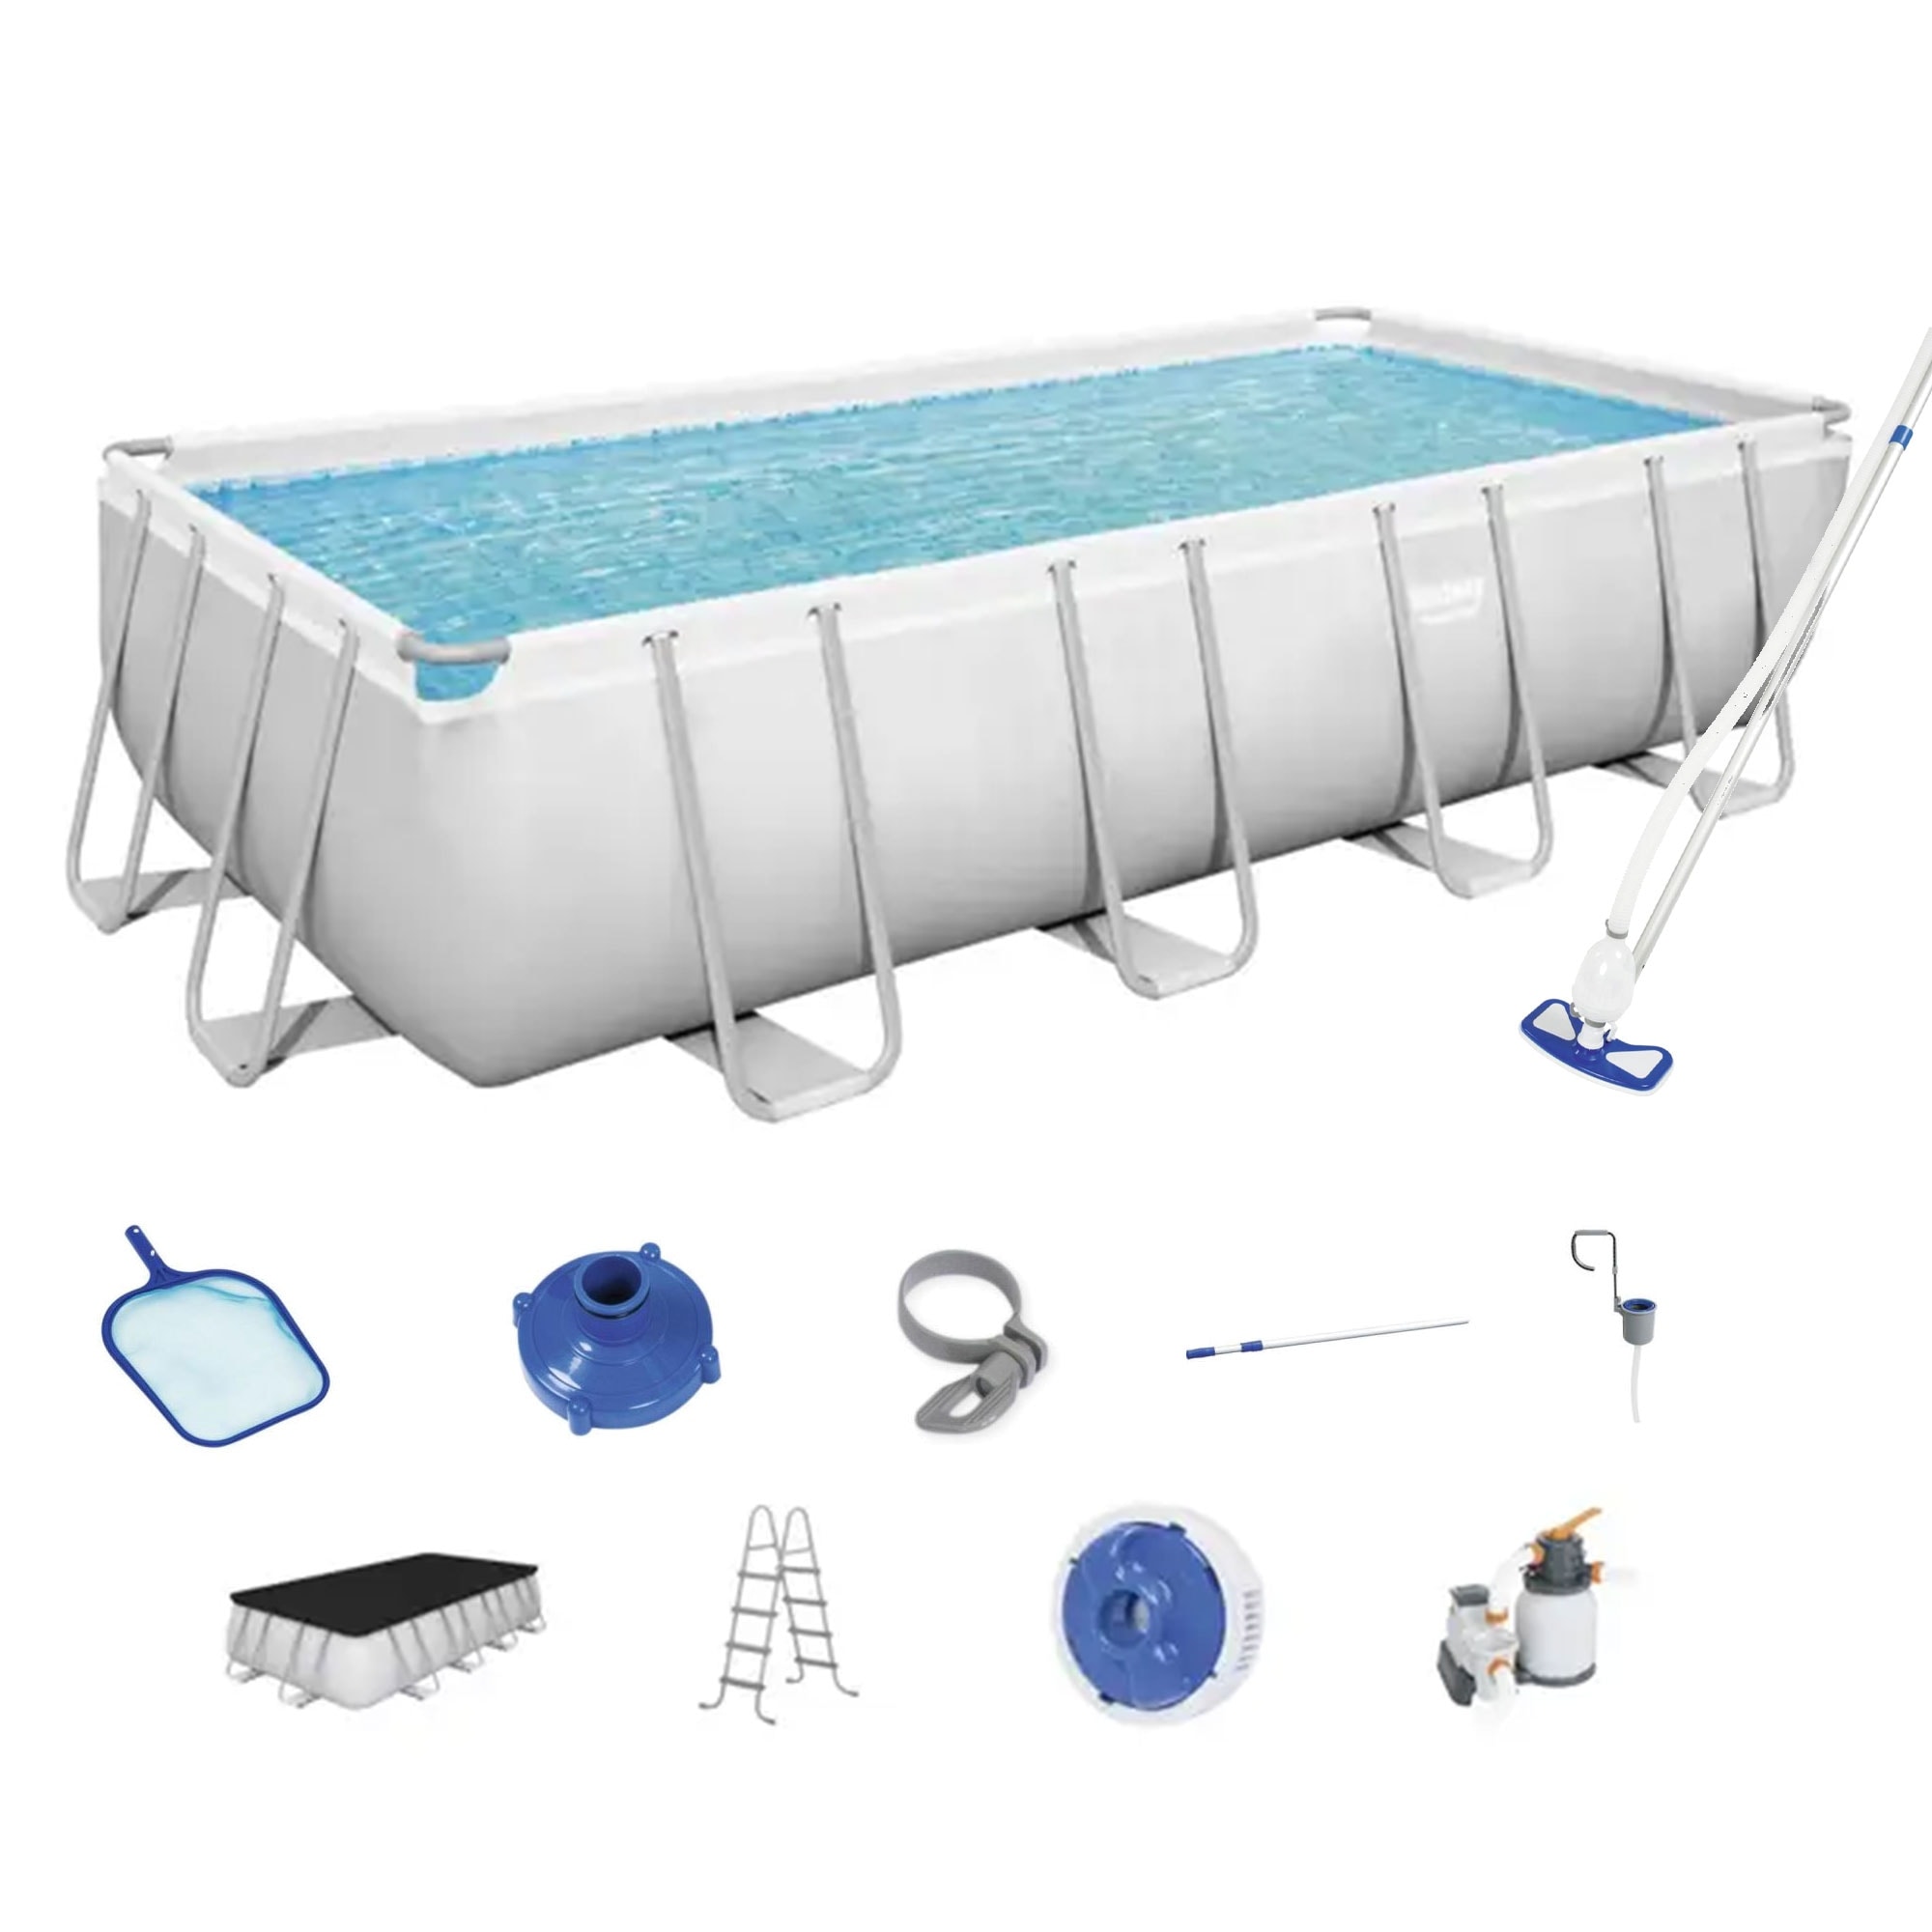 Bestway 18ft x 9ft x 4ft Rectangular Above Ground Swimming Pool w